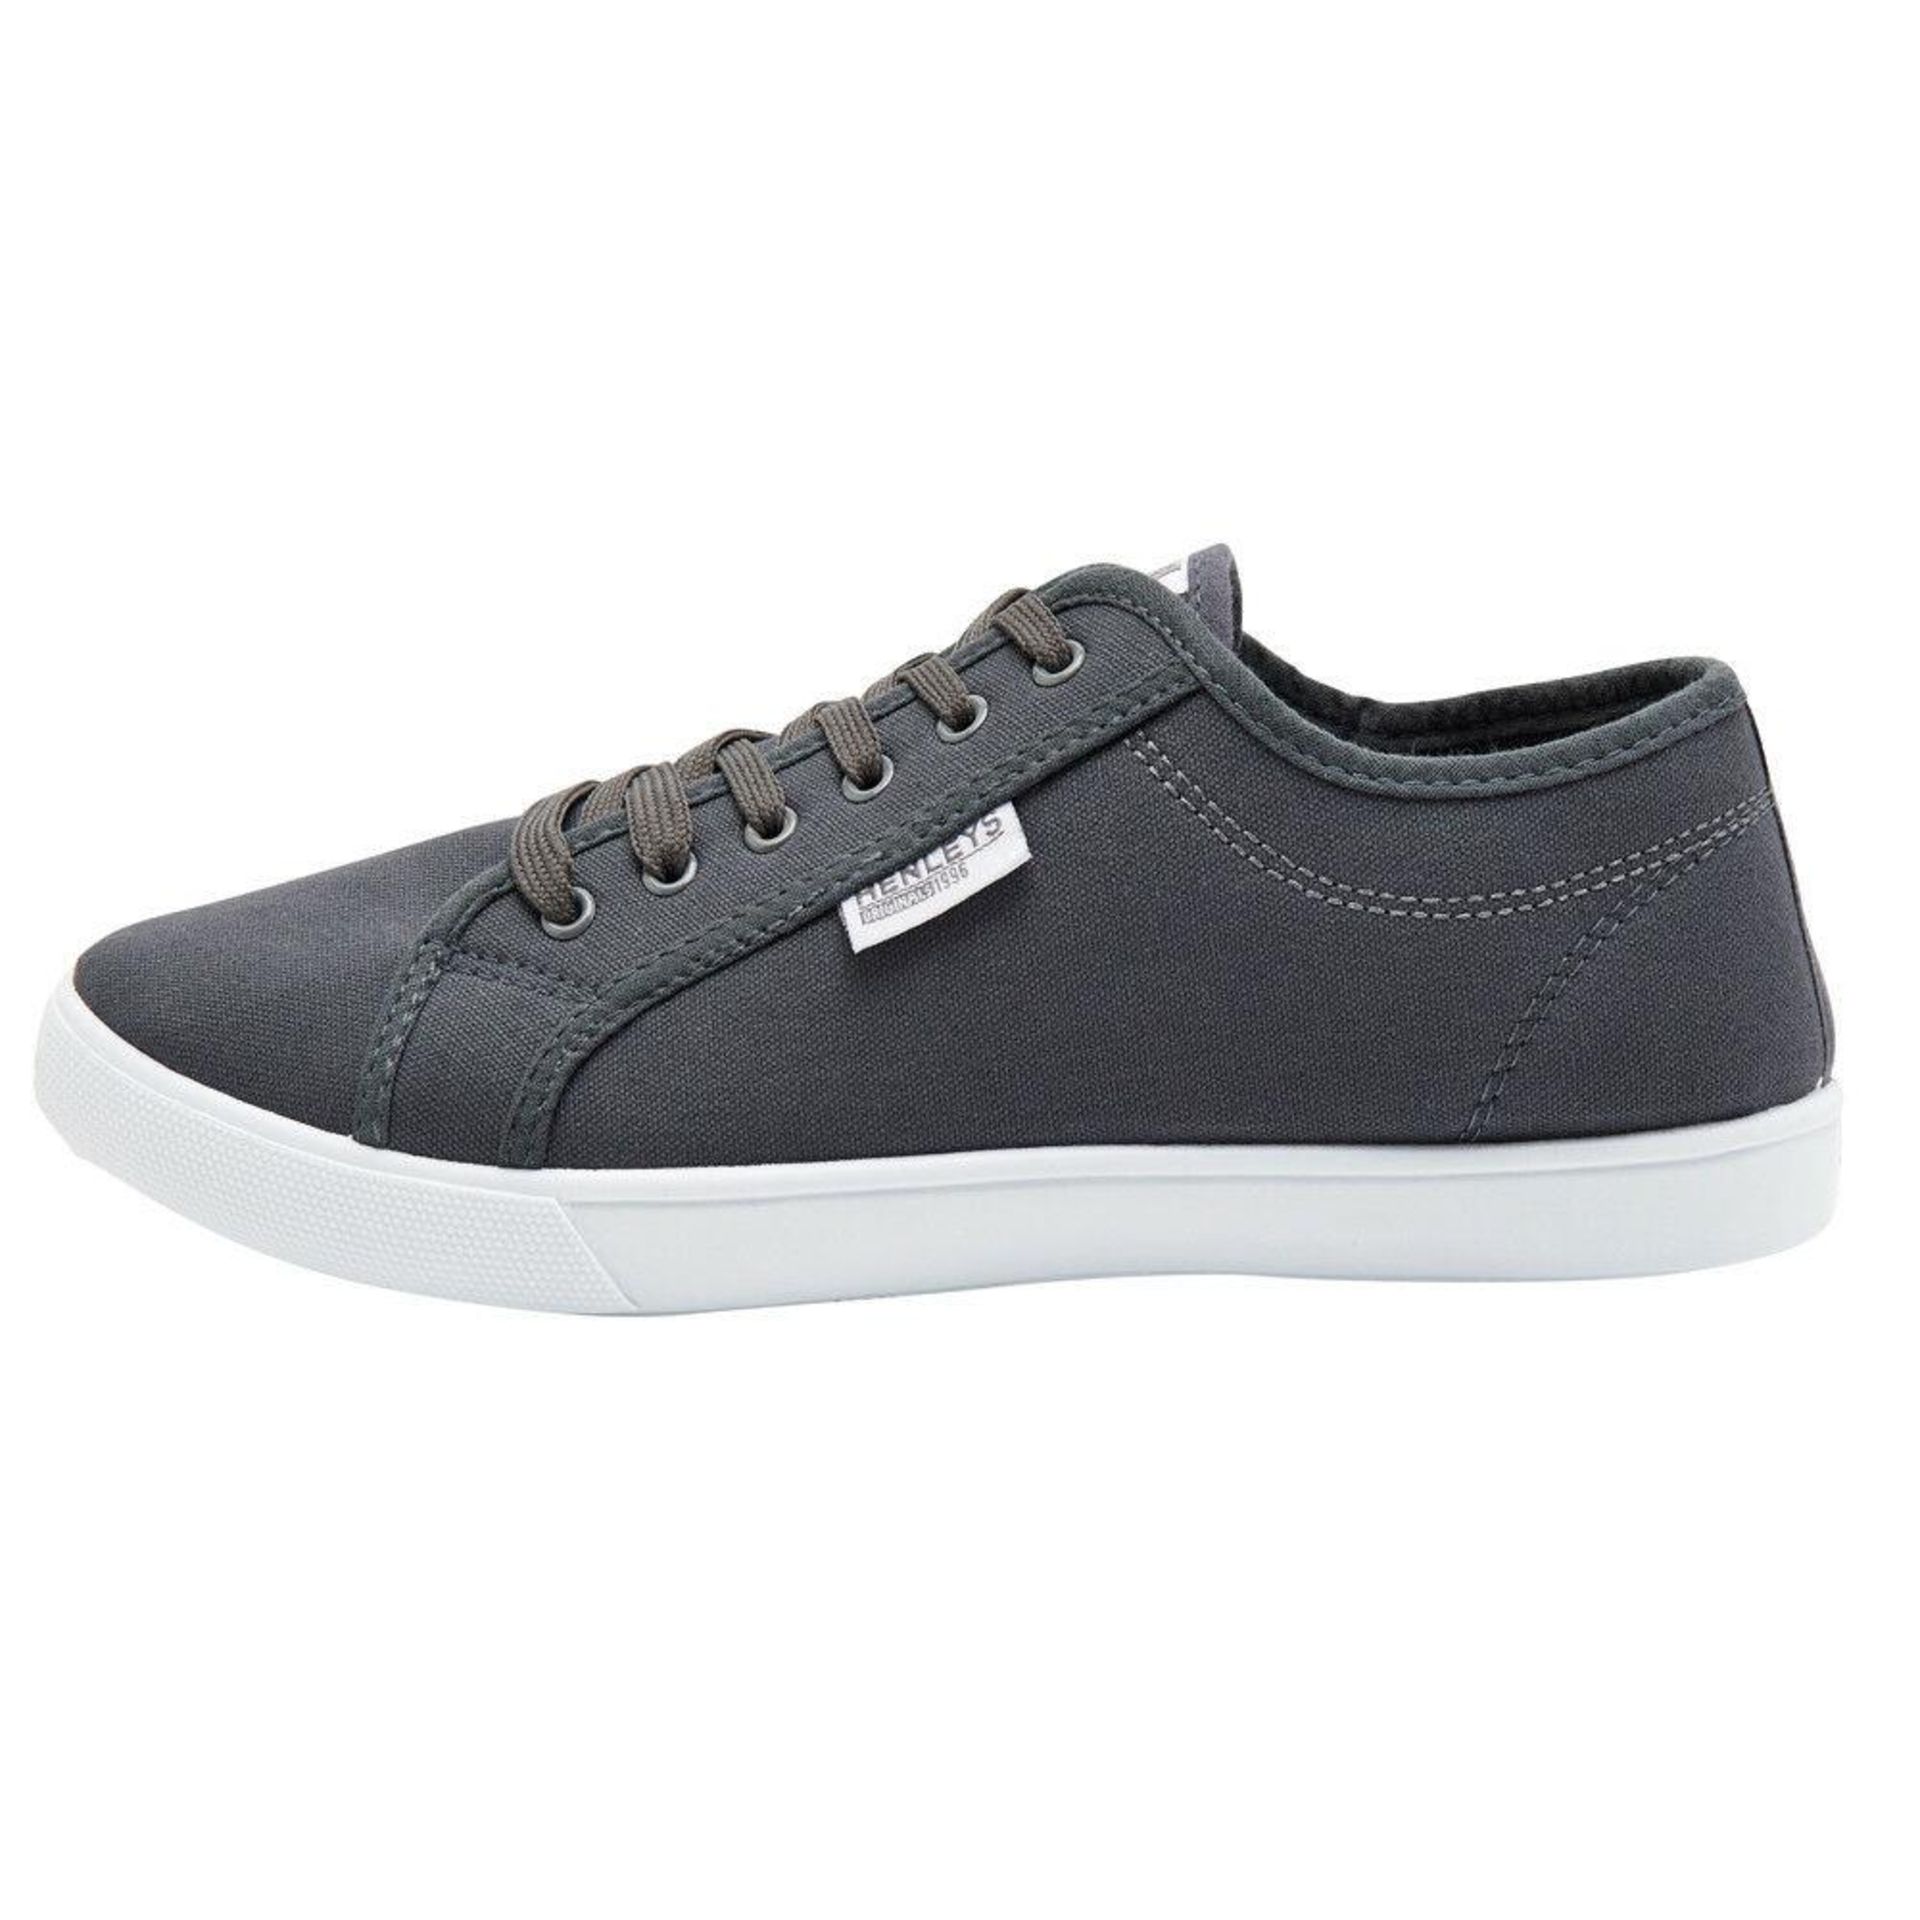 10 X BRAND NEW HENLEYS ORIGINAL CANVAS TRAINERS IN CHARCOAL GREY - ALL IN SIZE UK 7 - RRP £ 24. - Image 3 of 4